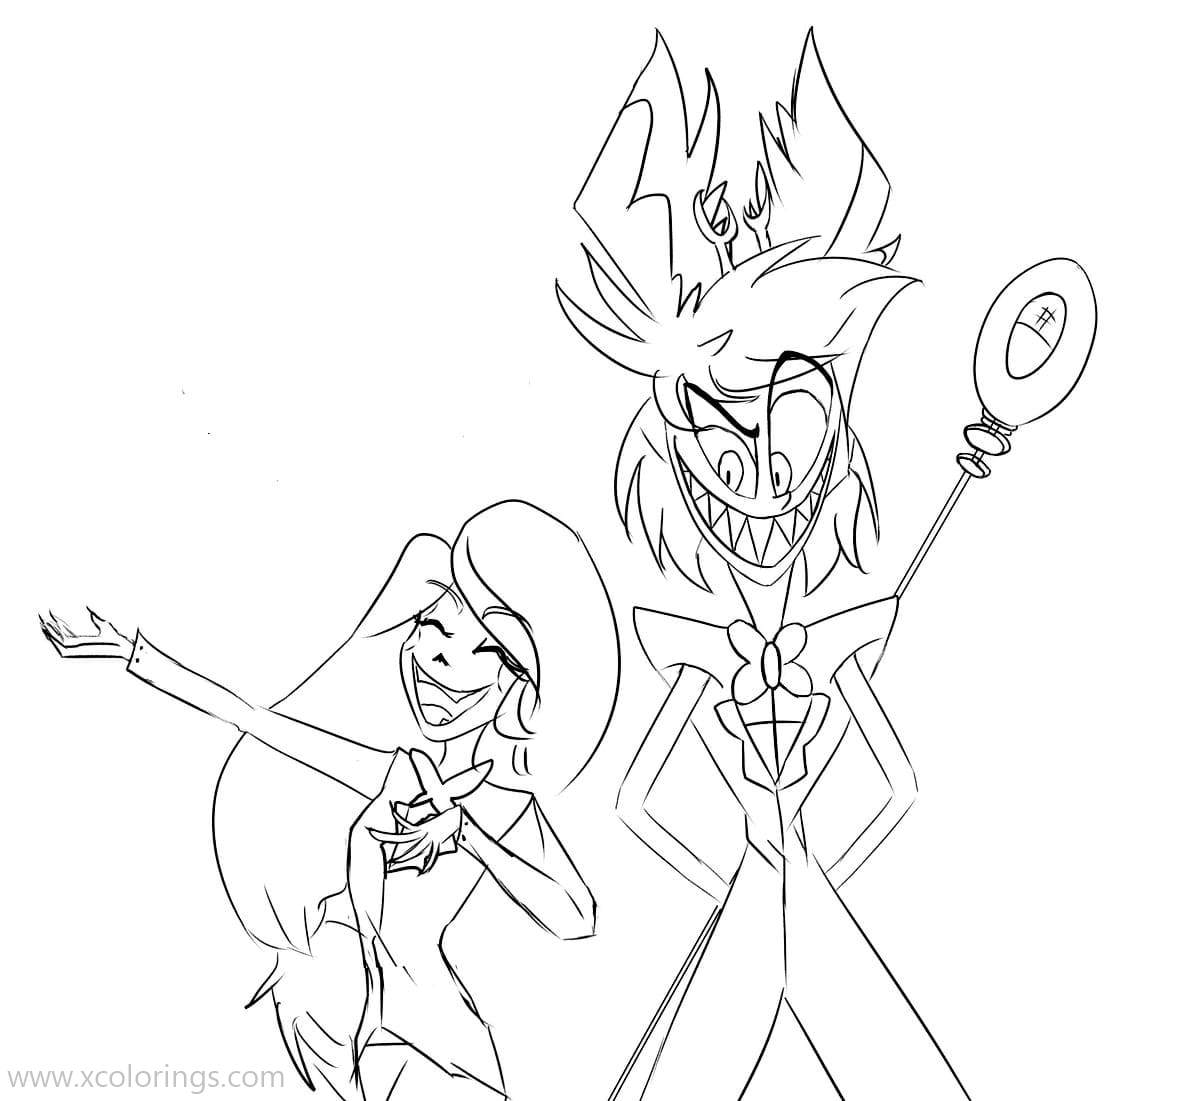 Free Hazbin Hotel Coloring Paegs Alastor On the Stage printable